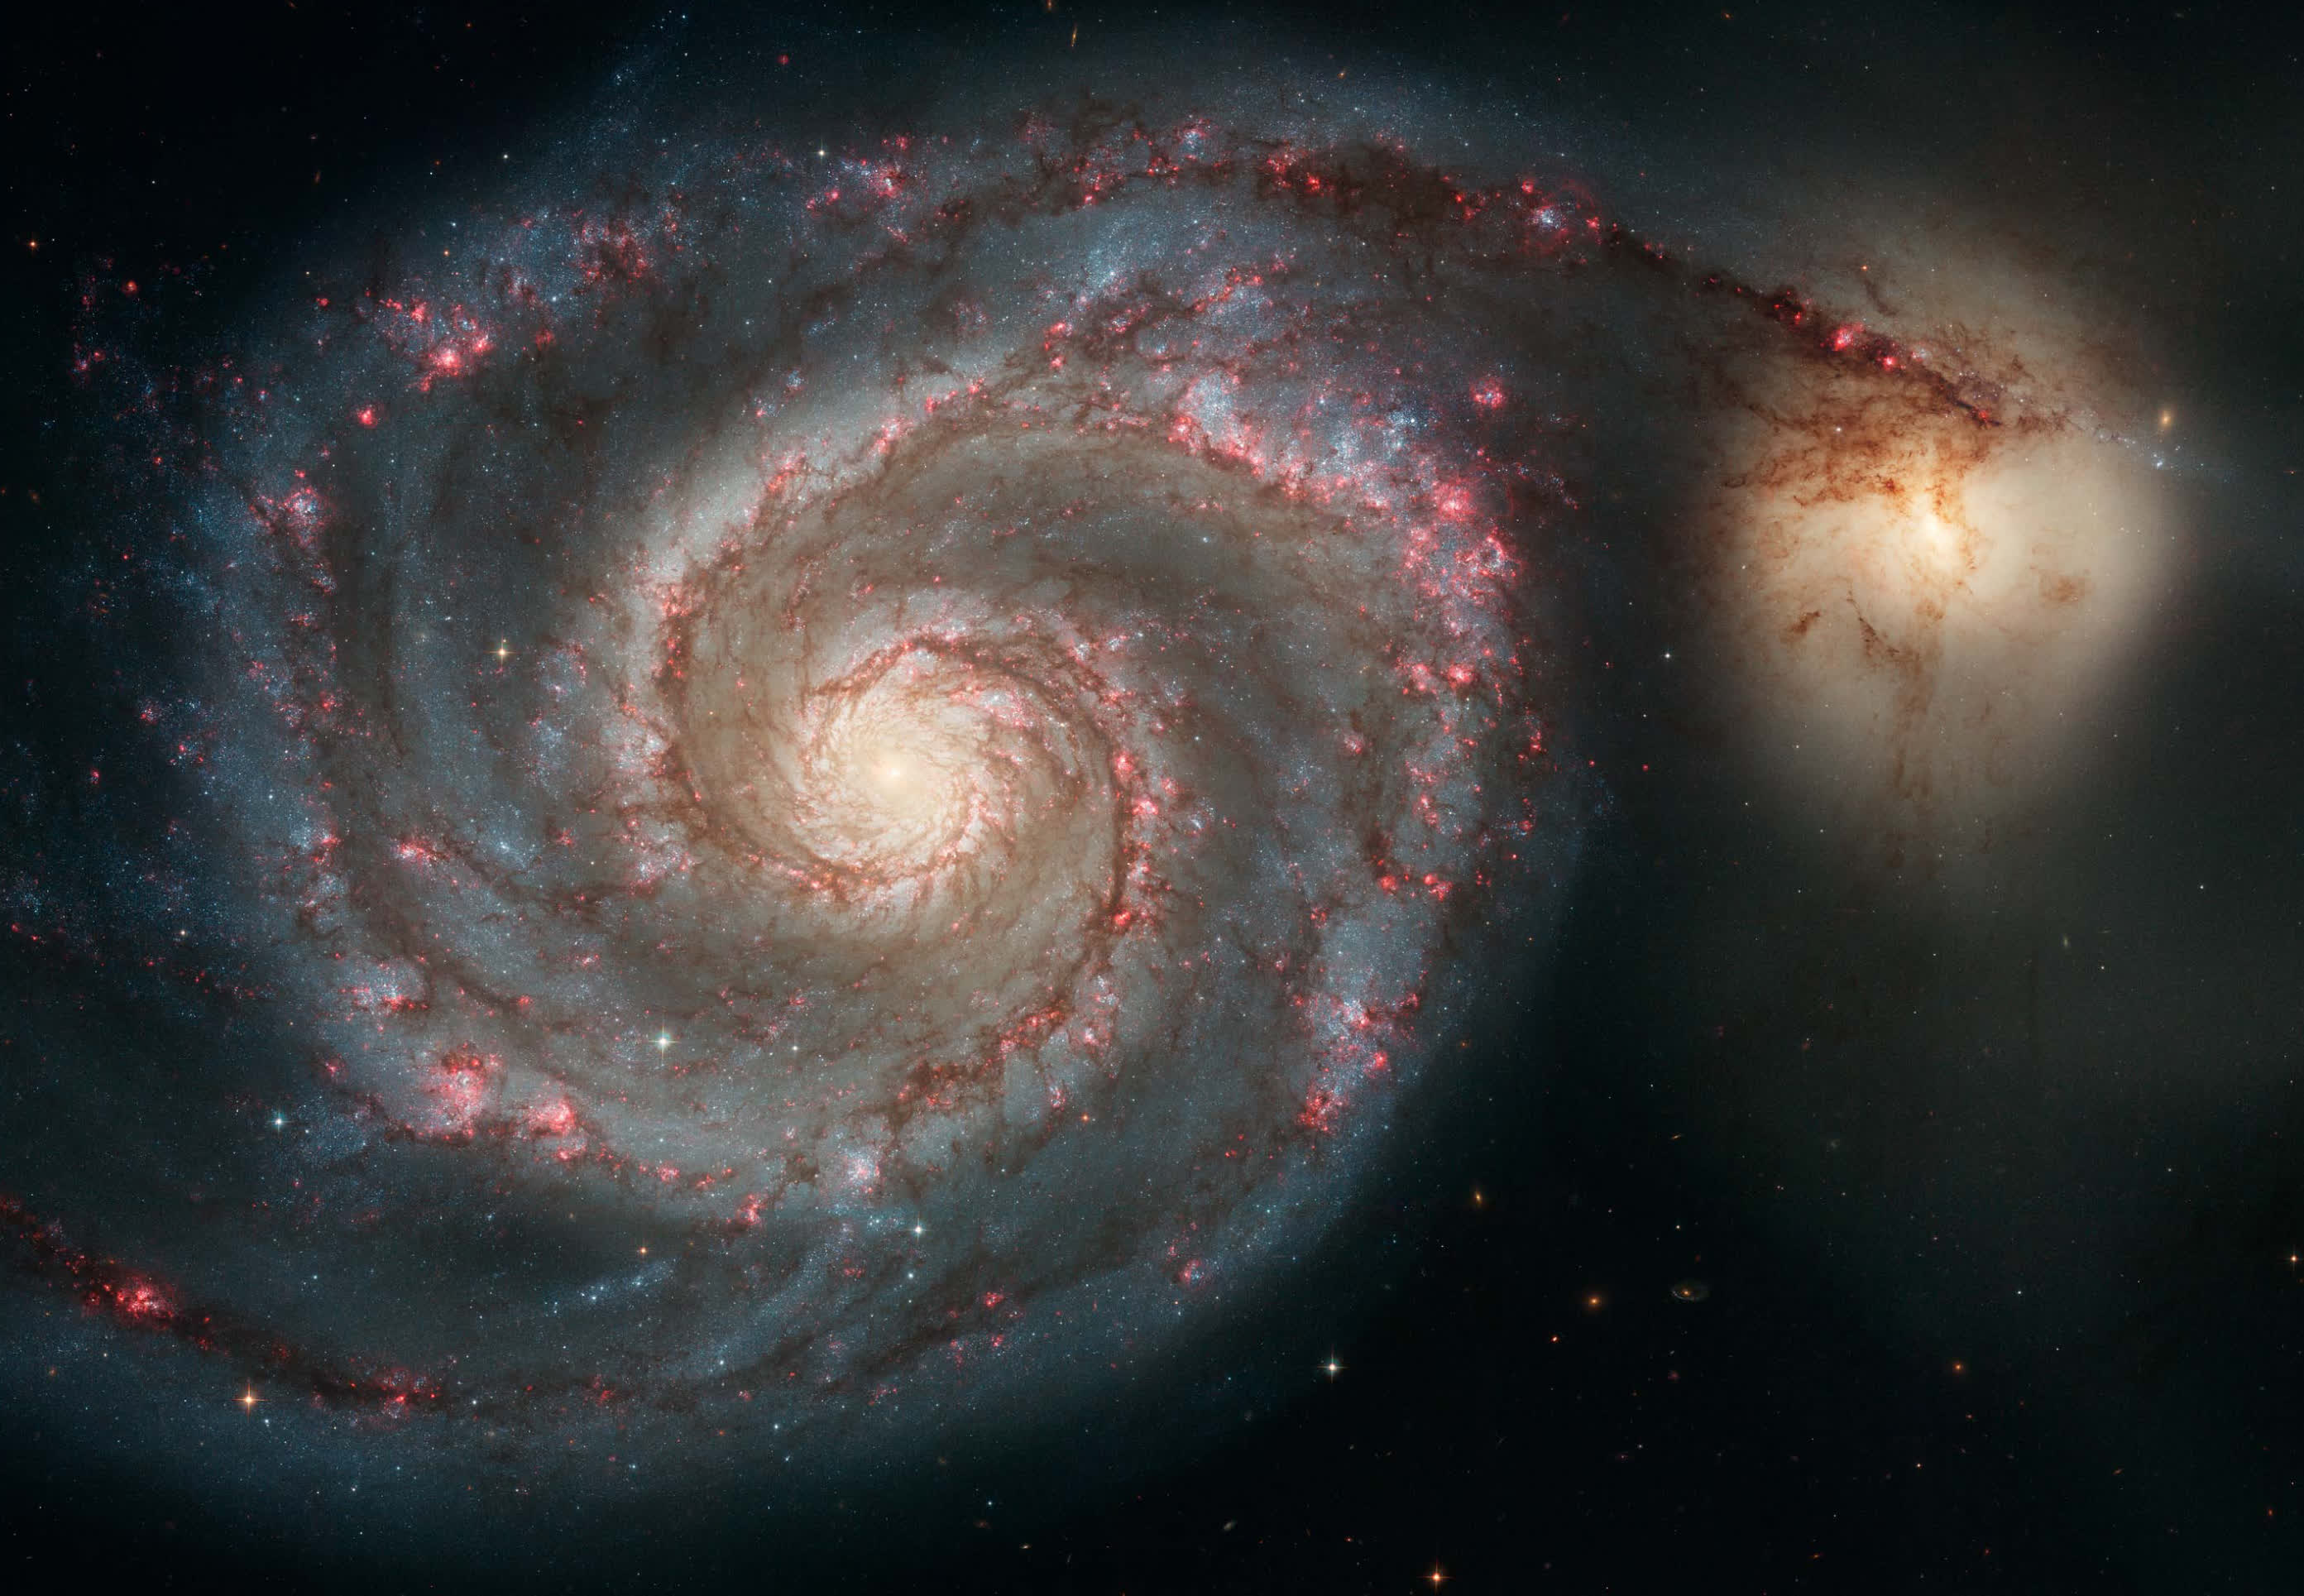 Check out 20 years of iconic images courtesy of NASA's Hubble telescope